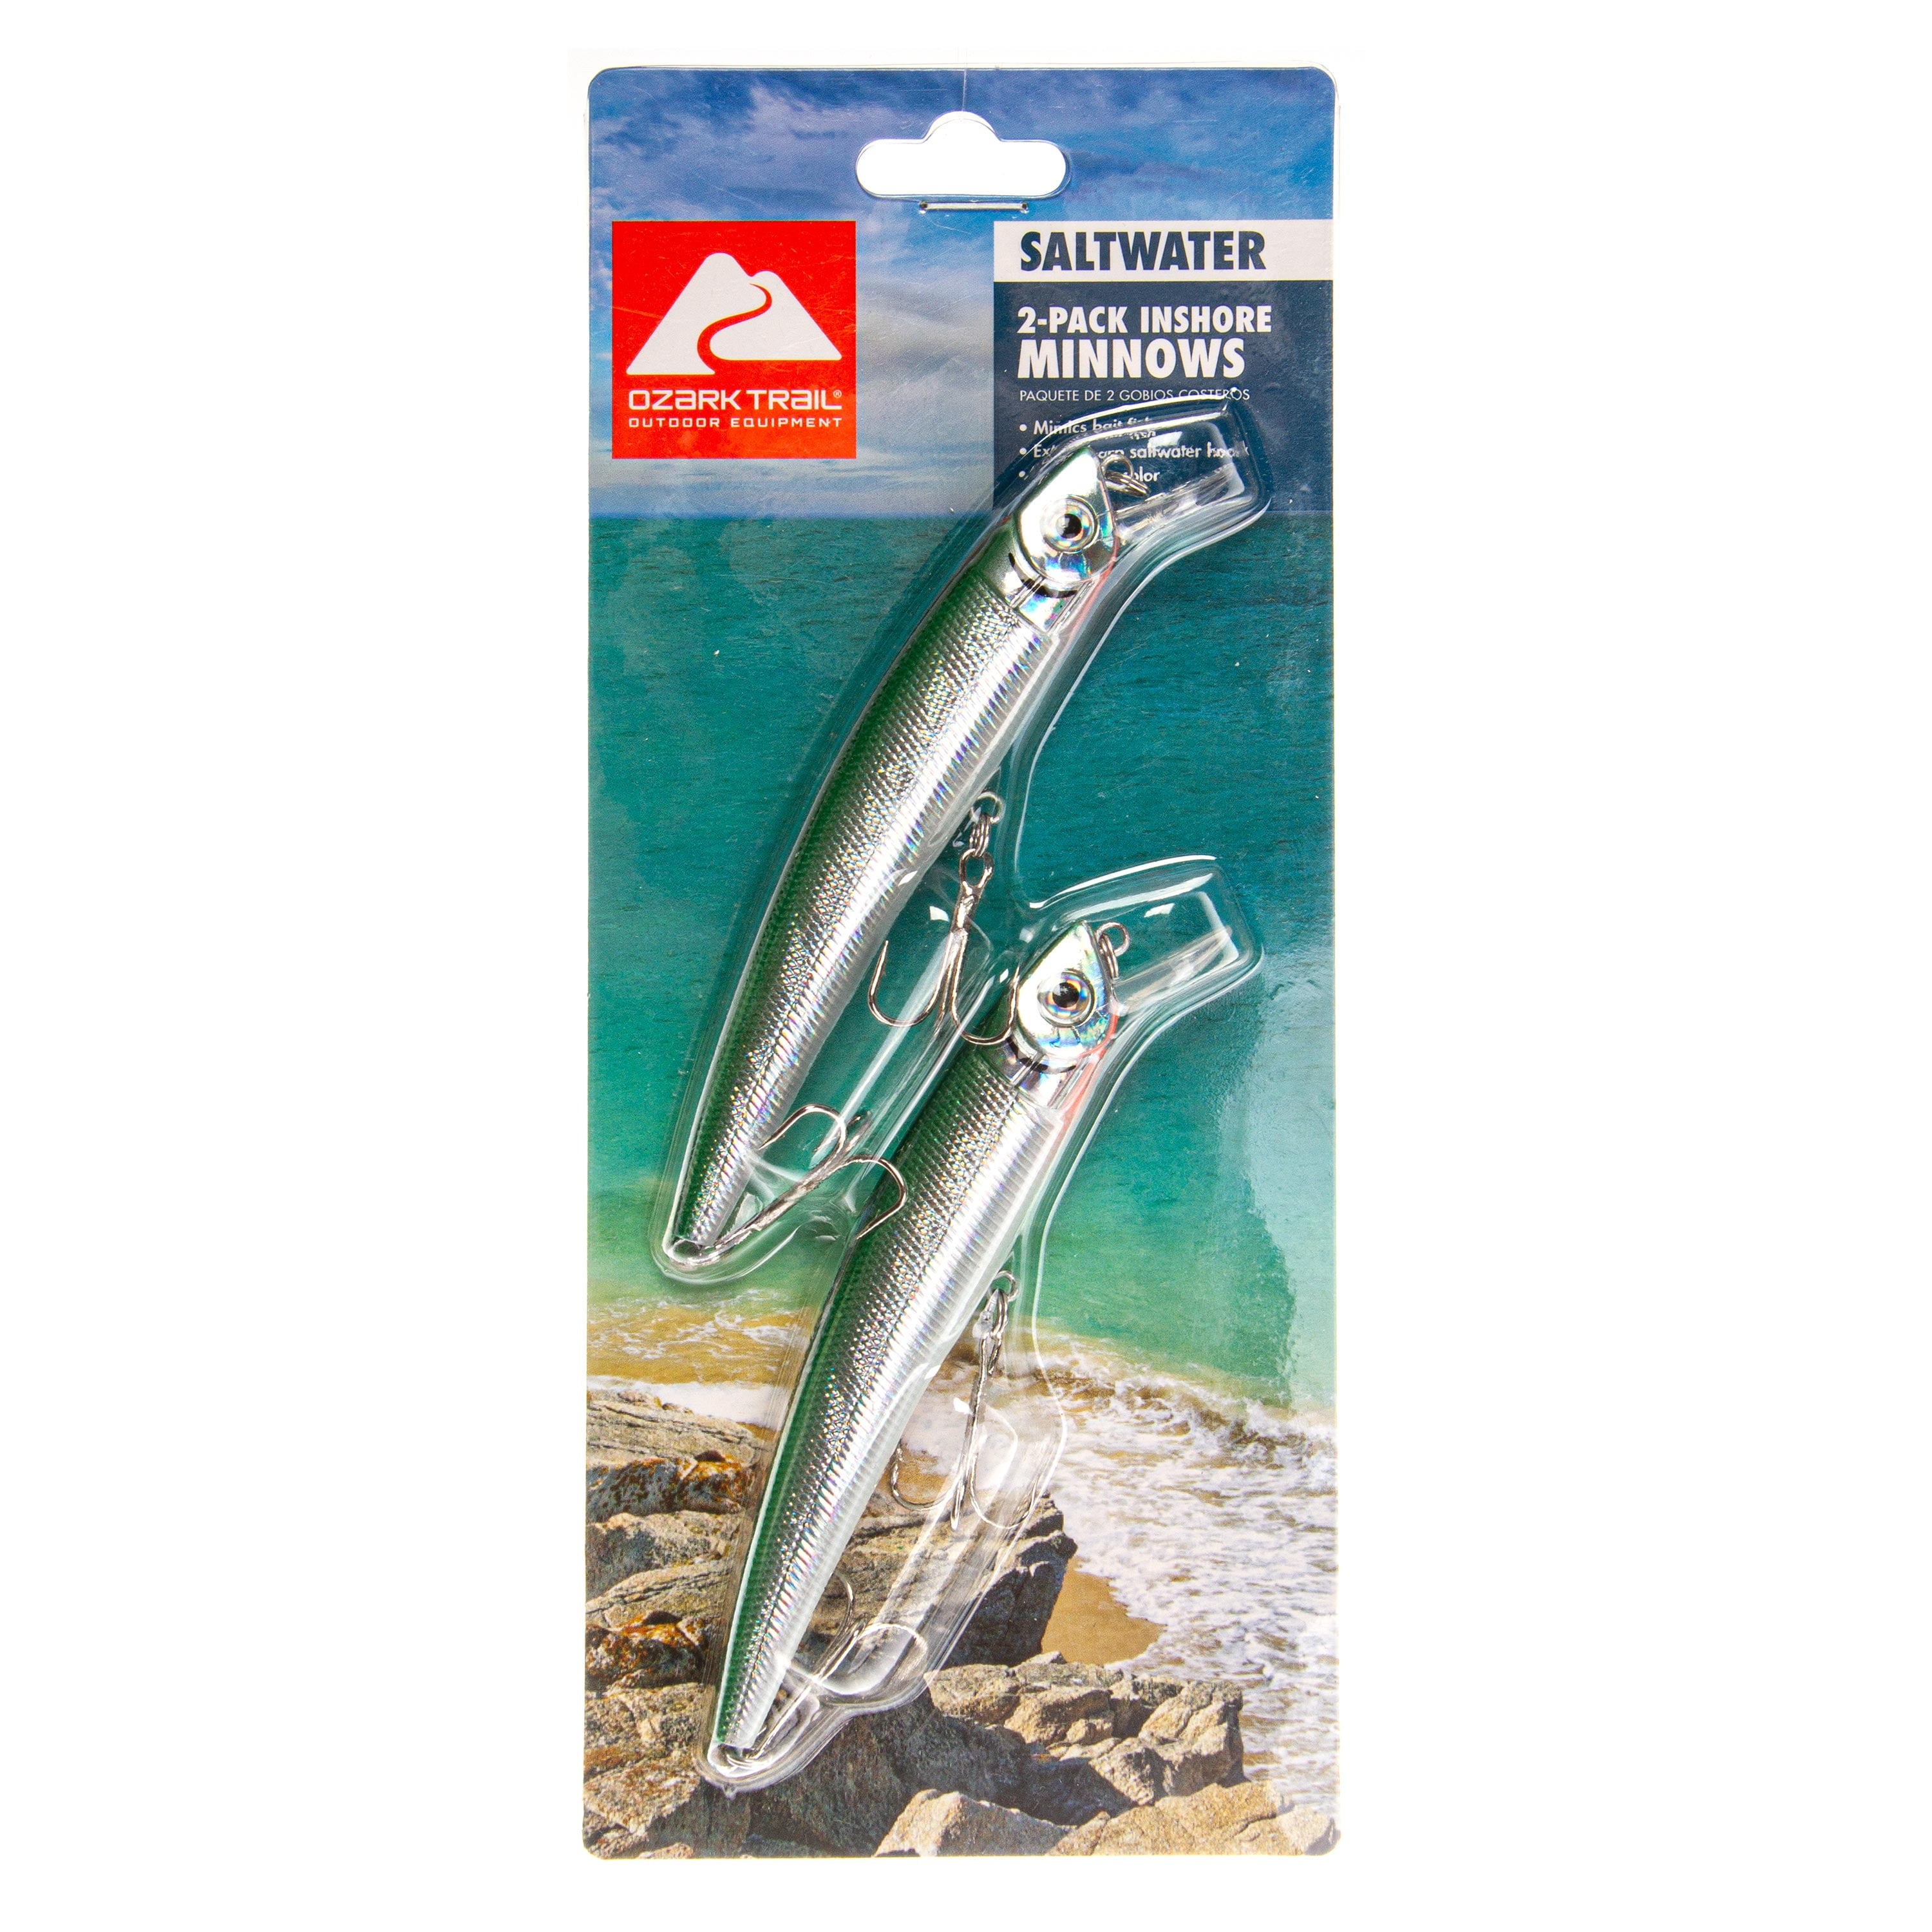 Ozark Trails Hard Plastic Saltwater Inshore Minnow Fishing Lures, 2-pack.  Painted in fish attracting colors. 